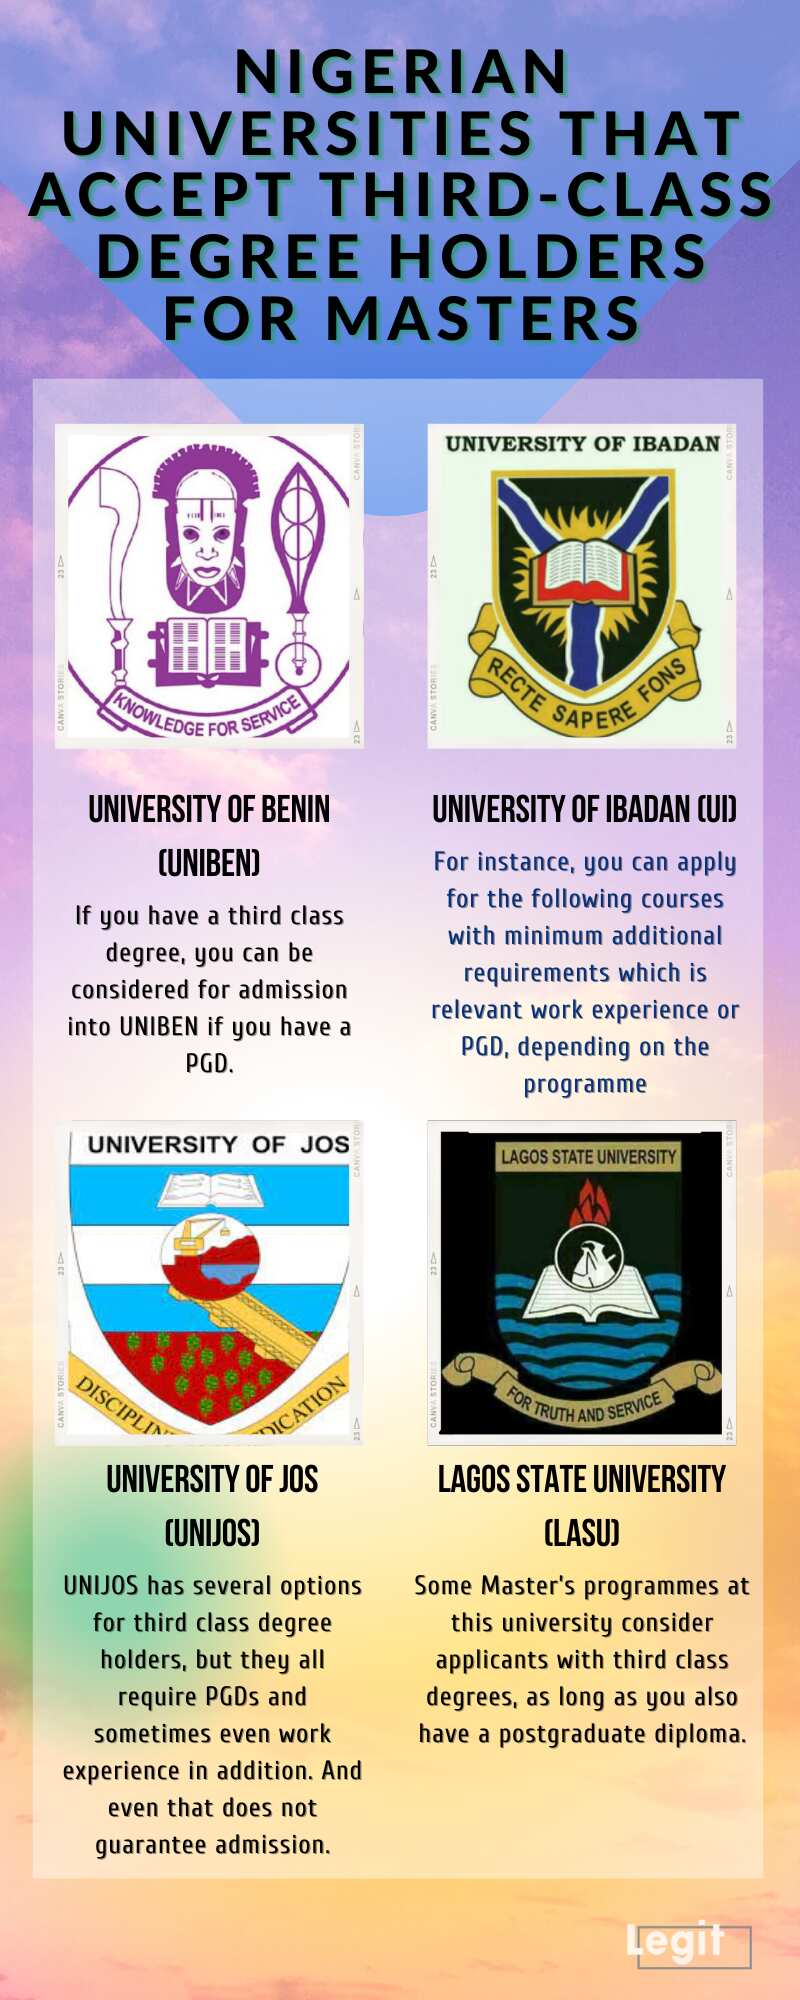 Nigerian universities that accept third-class degree holders for Masters